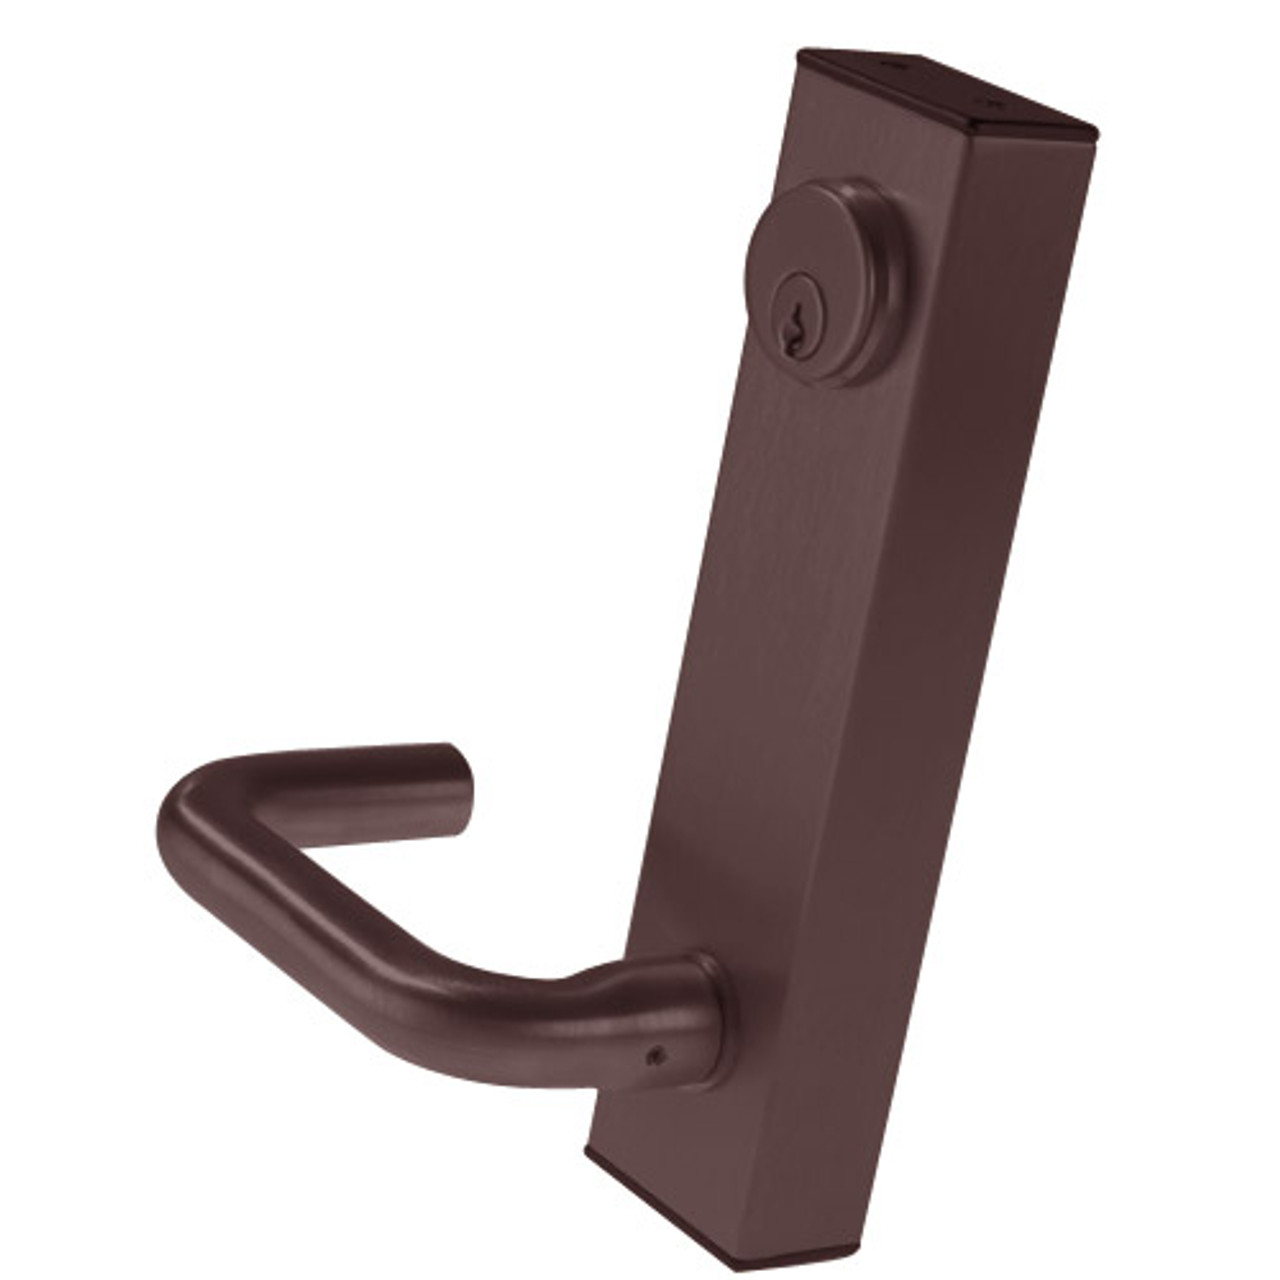 3080E-02-0-97-30 US10B Adams Rite Electrified Entry Trim with Round Lever in Oil Rubbed Bronze Finish